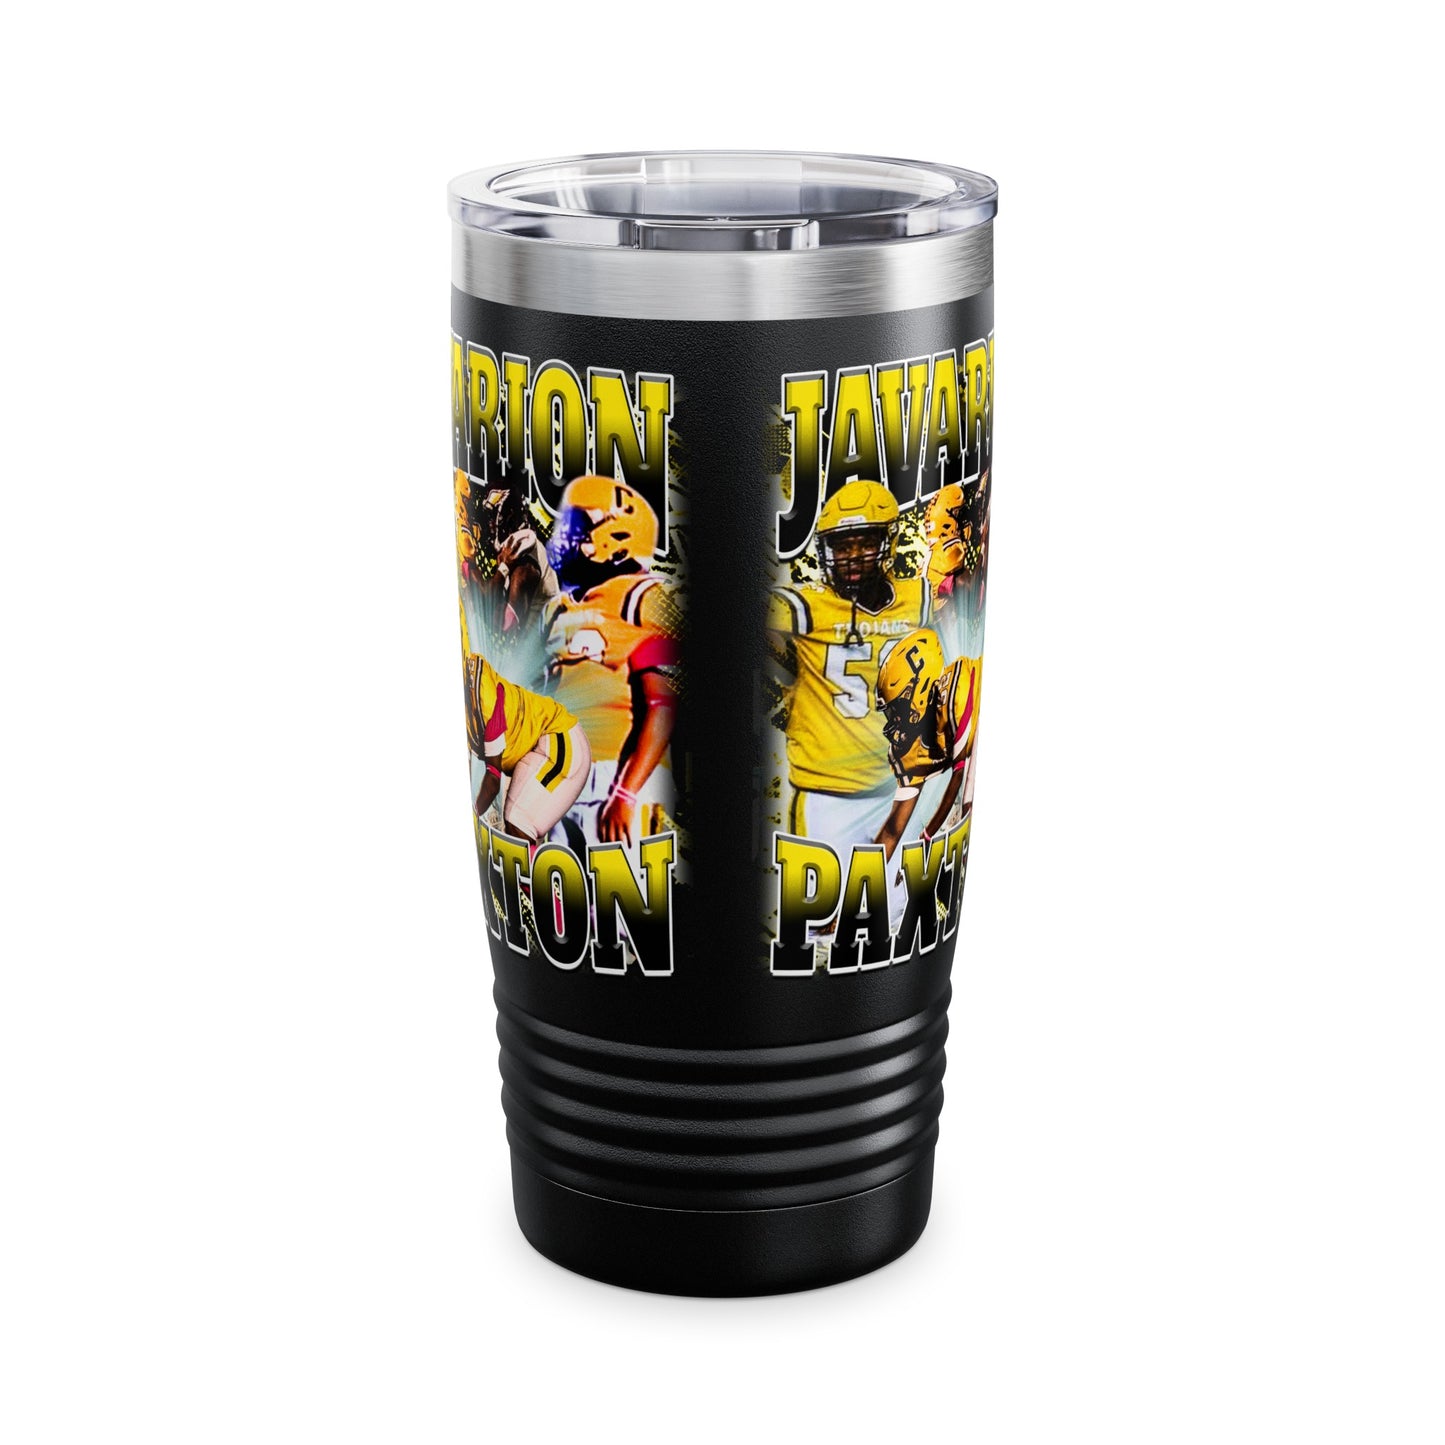 Javarion Paxton Stainless Steal Tumbler